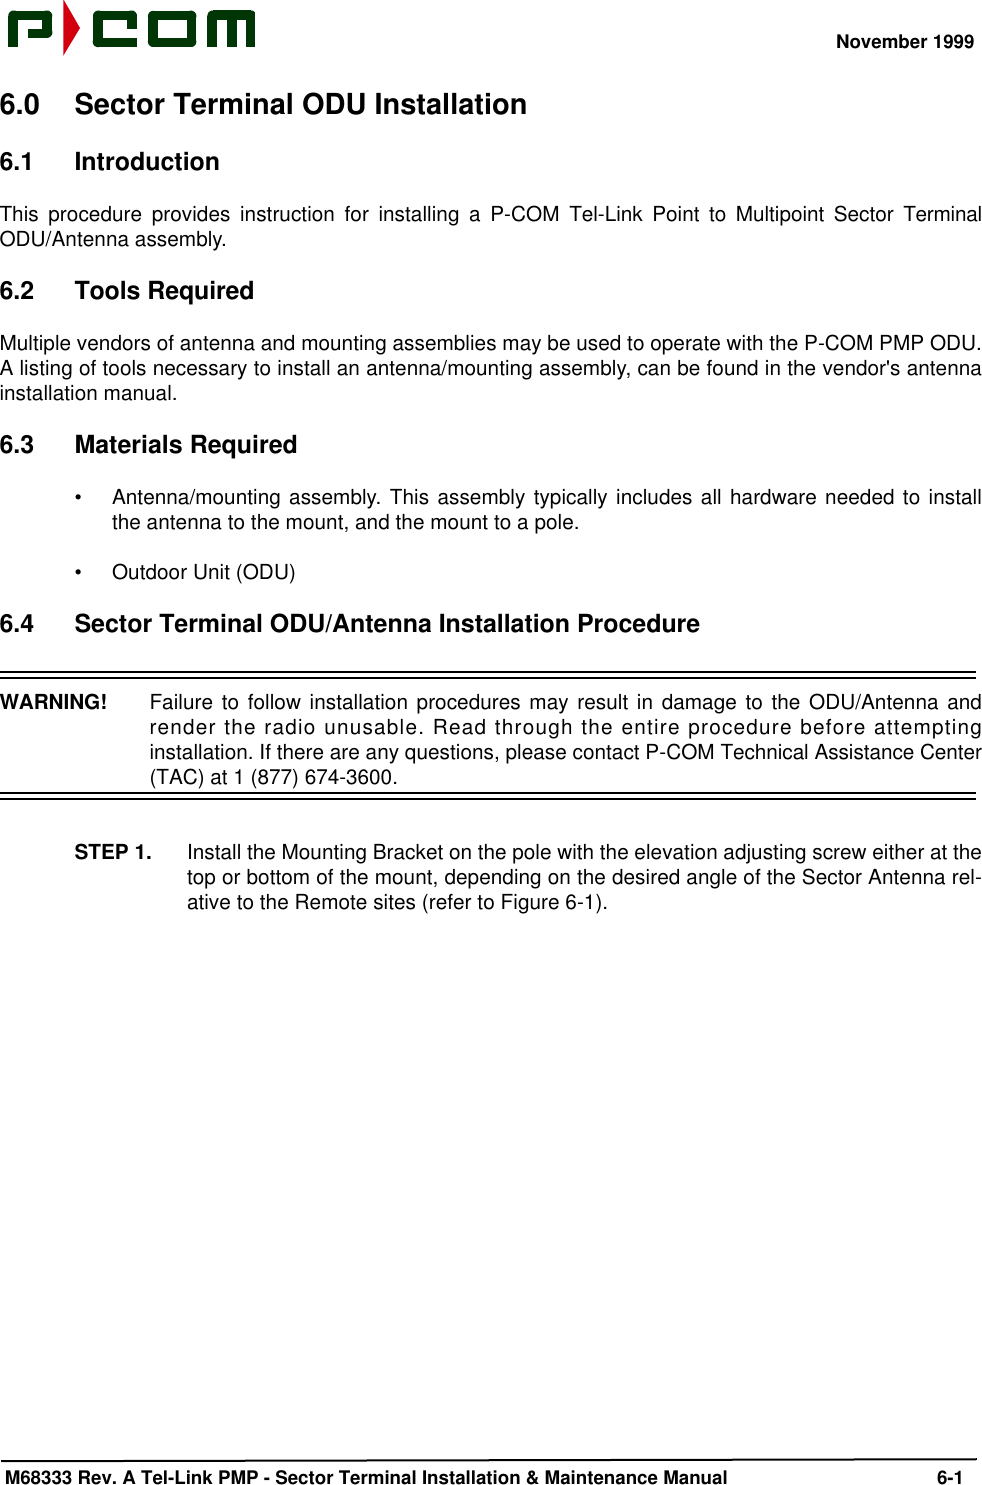 November 1999 M68333 Rev. A Tel-Link PMP - Sector Terminal Installation &amp; Maintenance Manual 6-16.0 Sector Terminal ODU Installation6.1 IntroductionThis procedure provides instruction for installing a P-COM Tel-Link Point to Multipoint Sector TerminalODU/Antenna assembly. 6.2 Tools RequiredMultiple vendors of antenna and mounting assemblies may be used to operate with the P-COM PMP ODU.A listing of tools necessary to install an antenna/mounting assembly, can be found in the vendor&apos;s antennainstallation manual.6.3 Materials Required•Antenna/mounting assembly. This assembly typically includes all hardware needed to installthe antenna to the mount, and the mount to a pole.•Outdoor Unit (ODU)6.4 Sector Terminal ODU/Antenna Installation ProcedureWARNING!  Failure to follow installation procedures may result in damage to the ODU/Antenna andrender the radio unusable. Read through the entire procedure before attemptinginstallation. If there are any questions, please contact P-COM Technical Assistance Center(TAC) at 1 (877) 674-3600.STEP 1. Install the Mounting Bracket on the pole with the elevation adjusting screw either at thetop or bottom of the mount, depending on the desired angle of the Sector Antenna rel-ative to the Remote sites (refer to Figure 6-1).